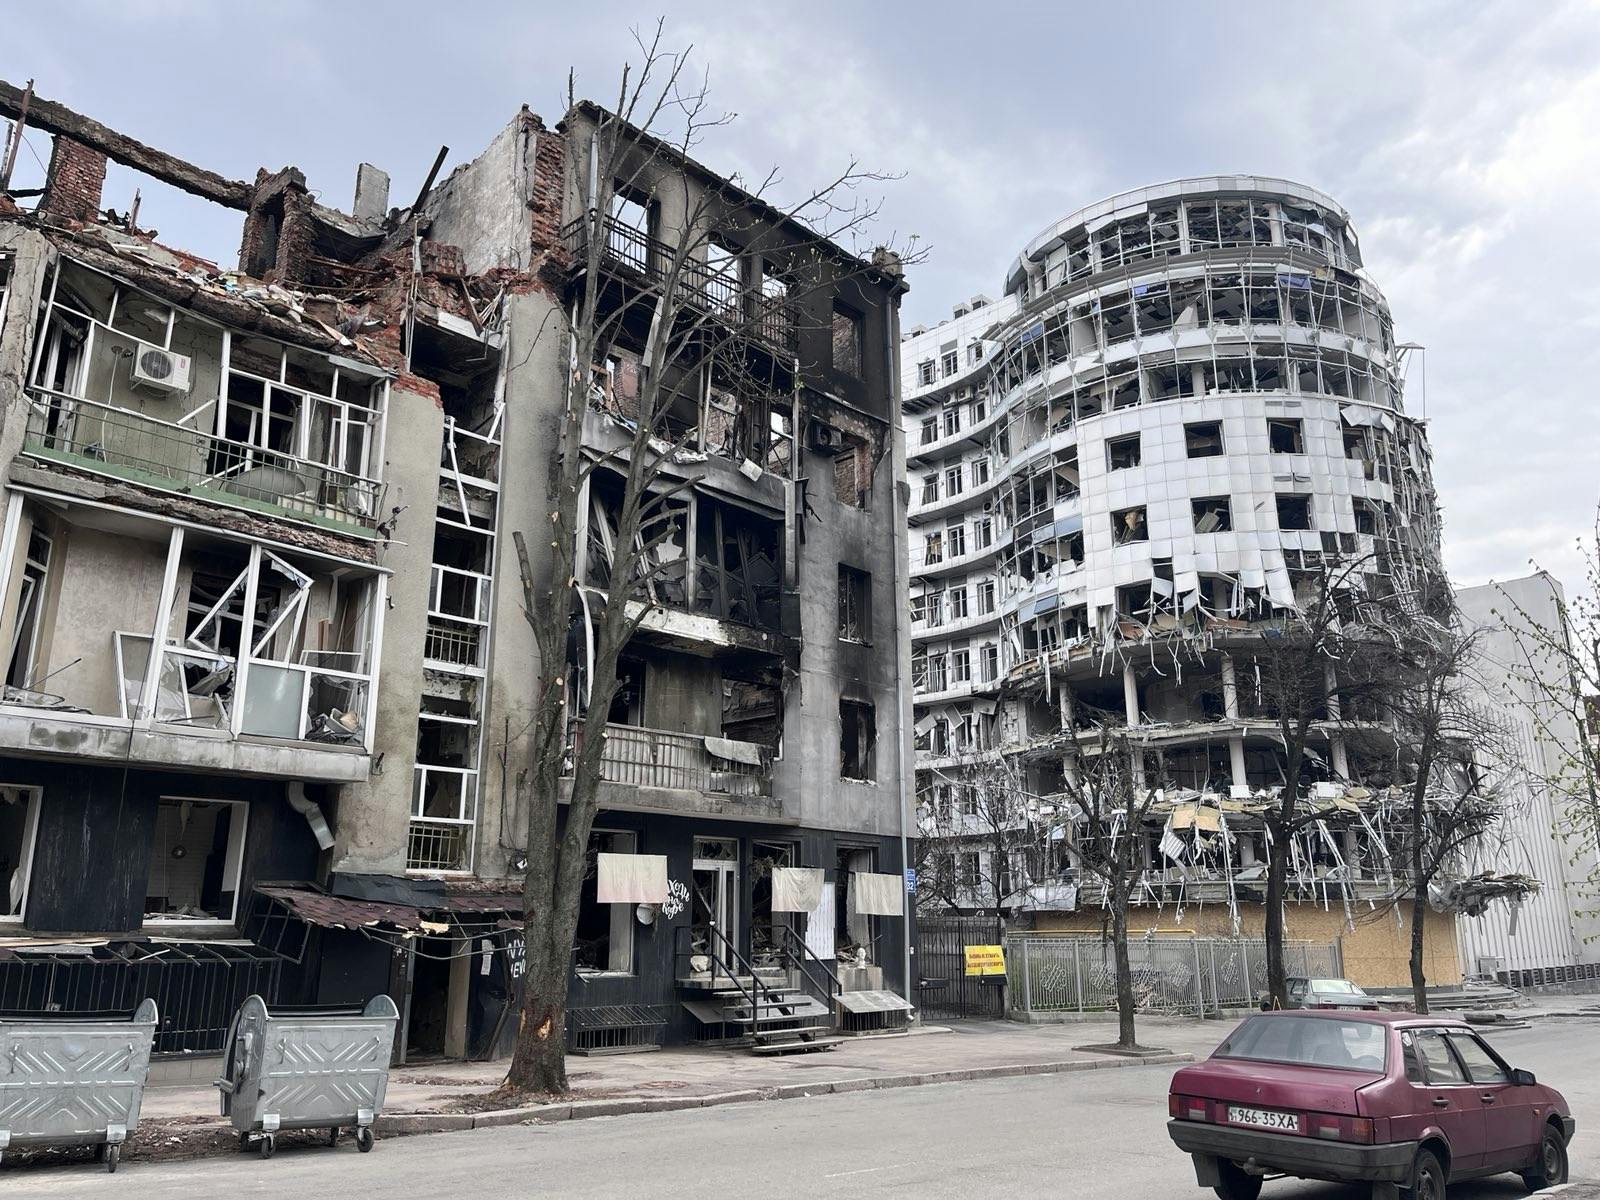 A residential building and office spaces destroyed during intense fighting in Kharkiv, Ukraine. Caleb Larson/The New York Sun